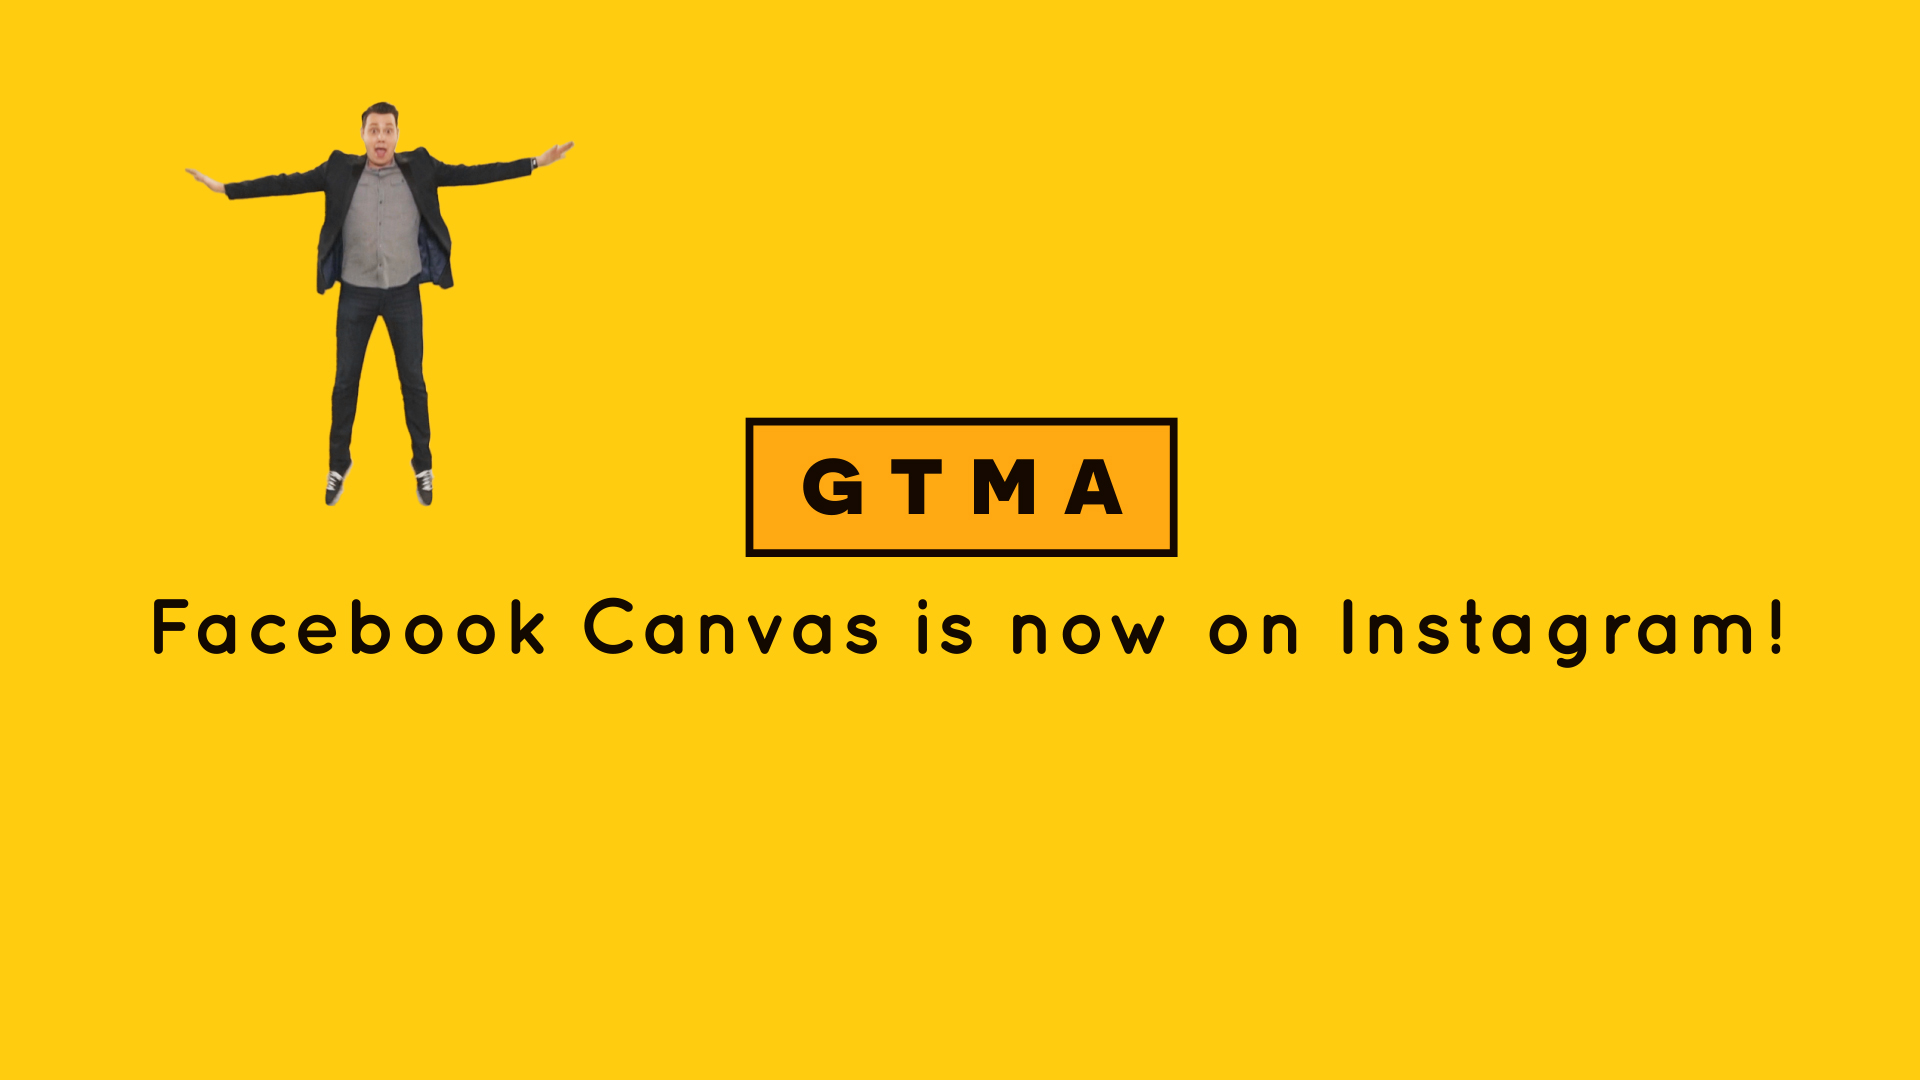 Facebook Canvas for Apartment Marketing Now Available on Instagram